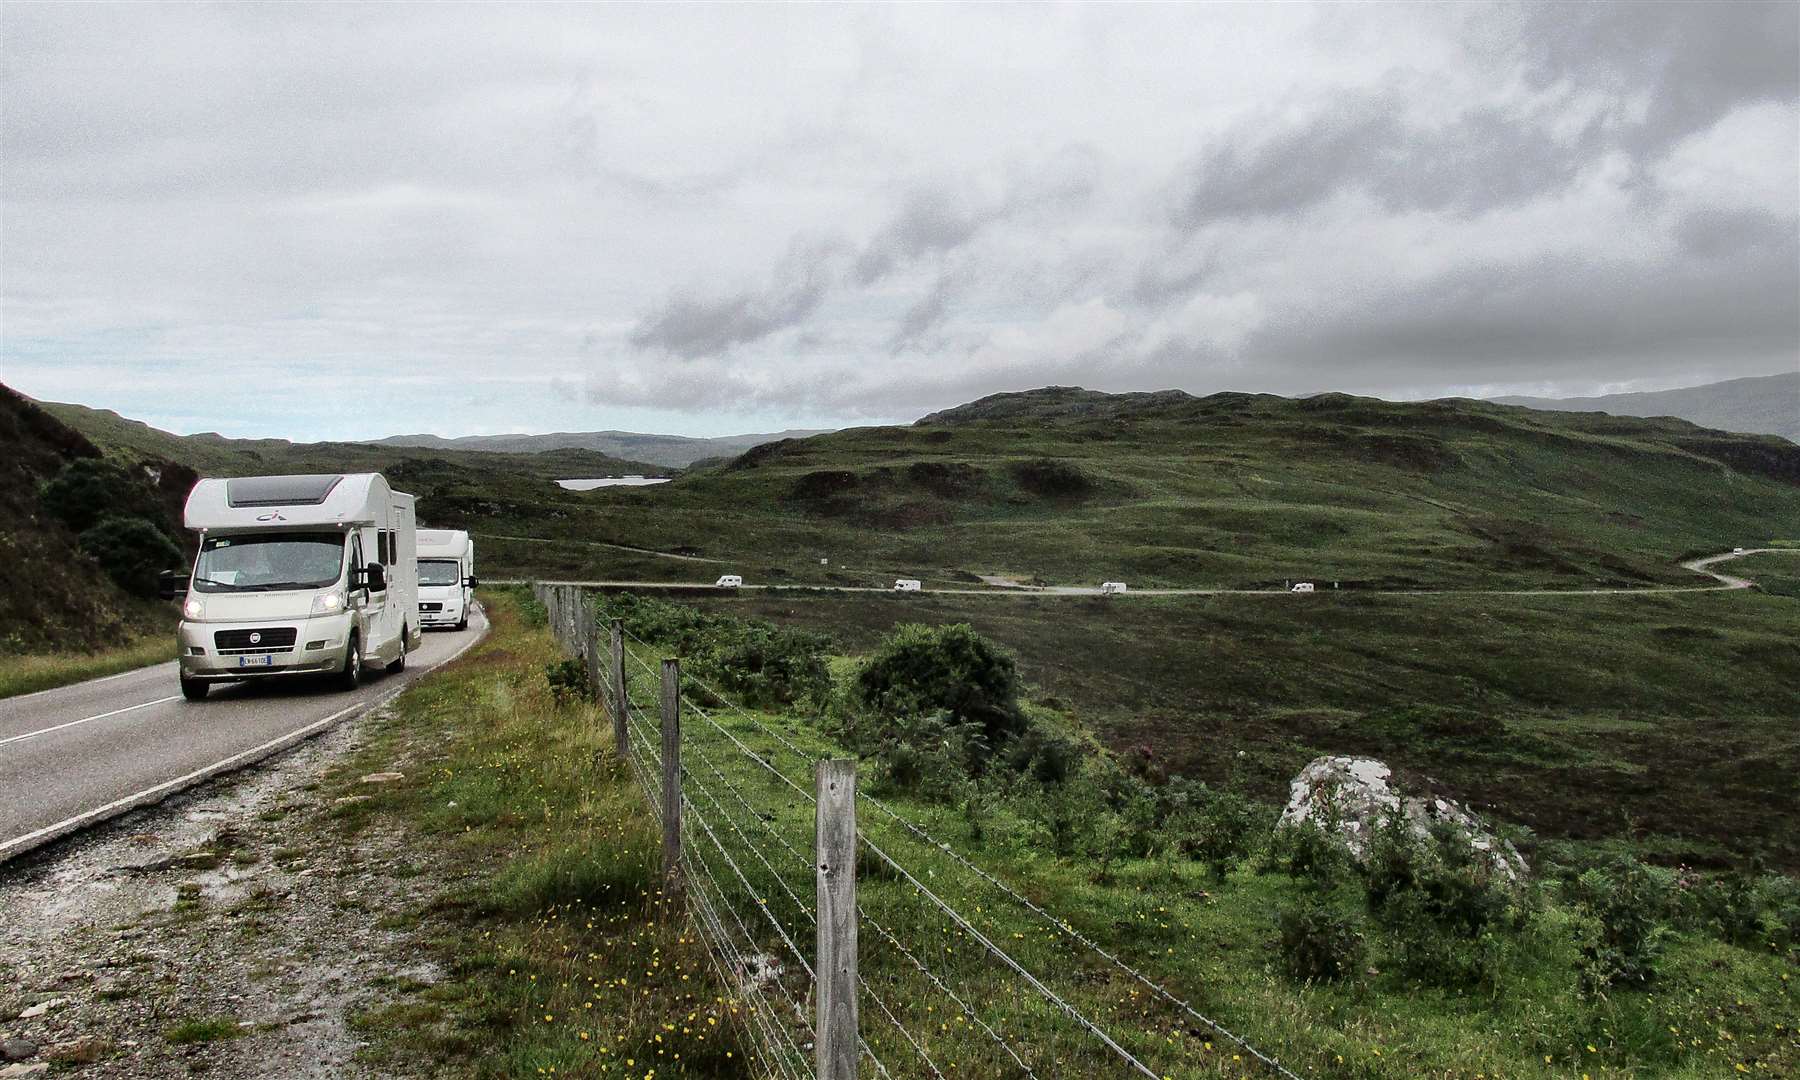 Ian Blackford says that roads in the Highlands are not geared up for convoys of motorhomes.